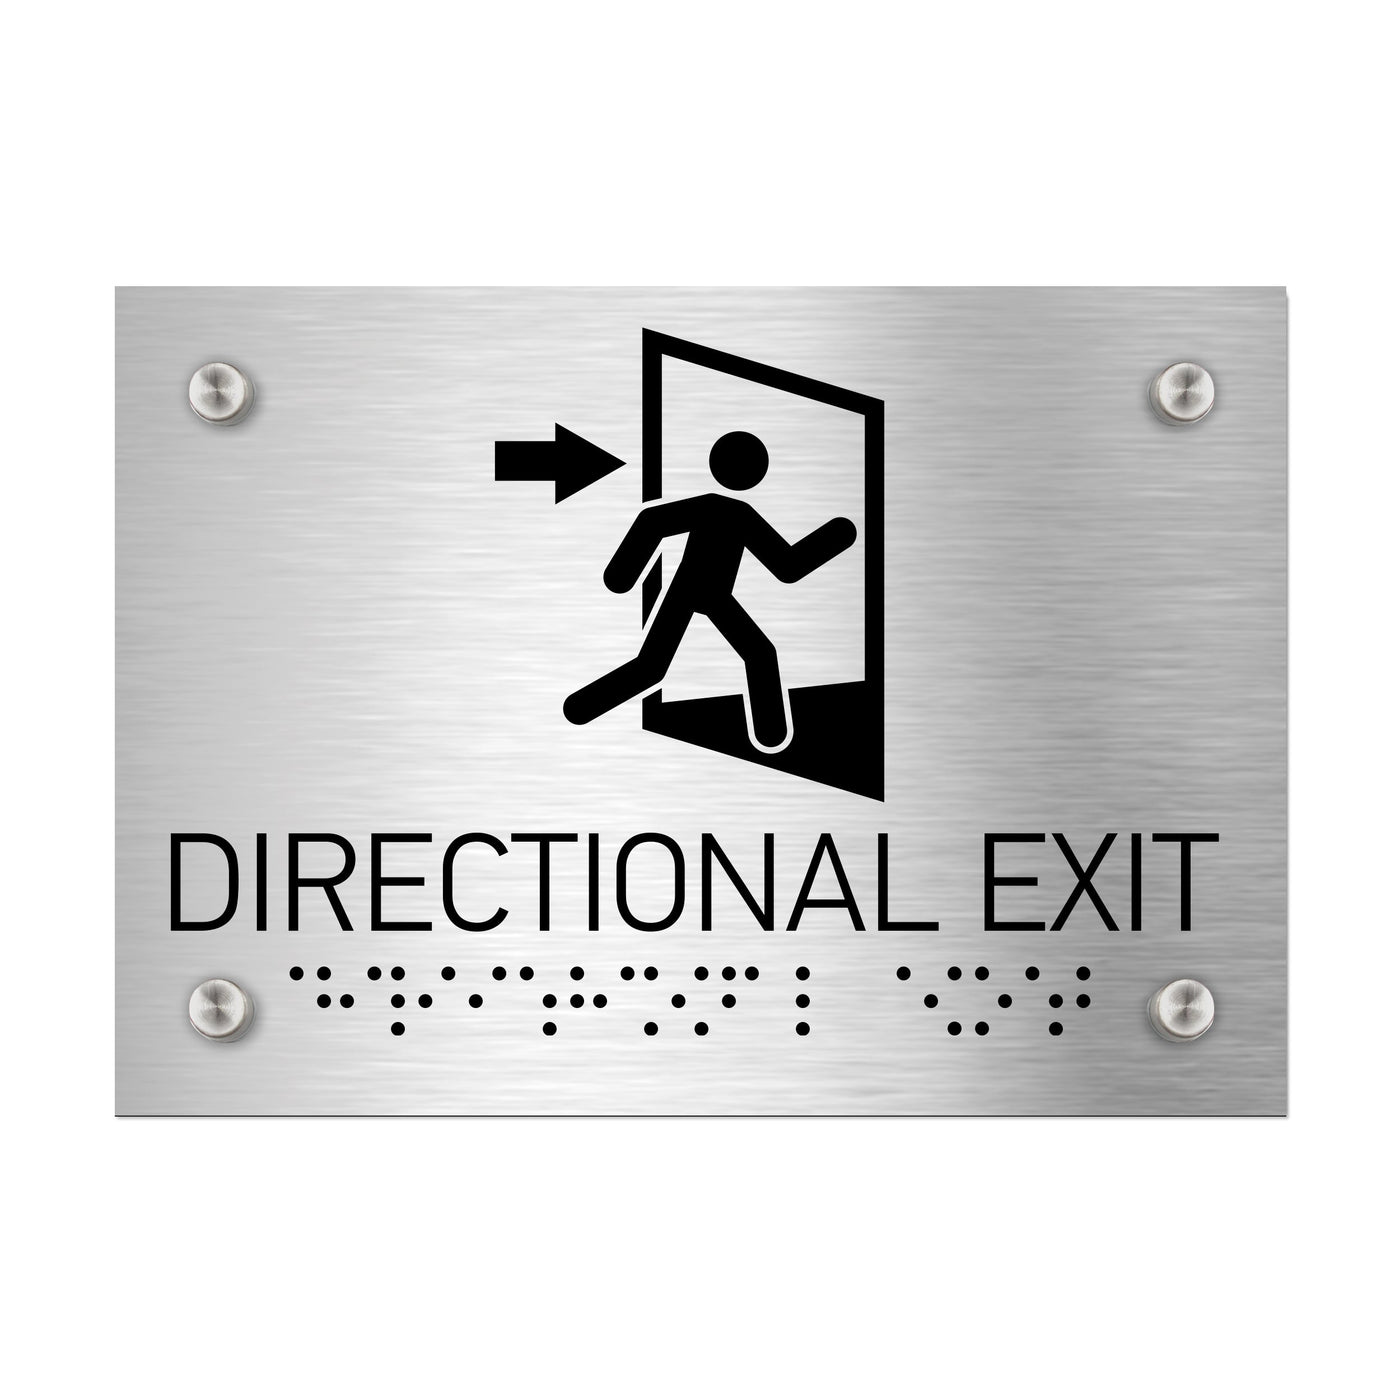 Information Signs - Directional Exit Door Sign Stainless Steel Whith Braille